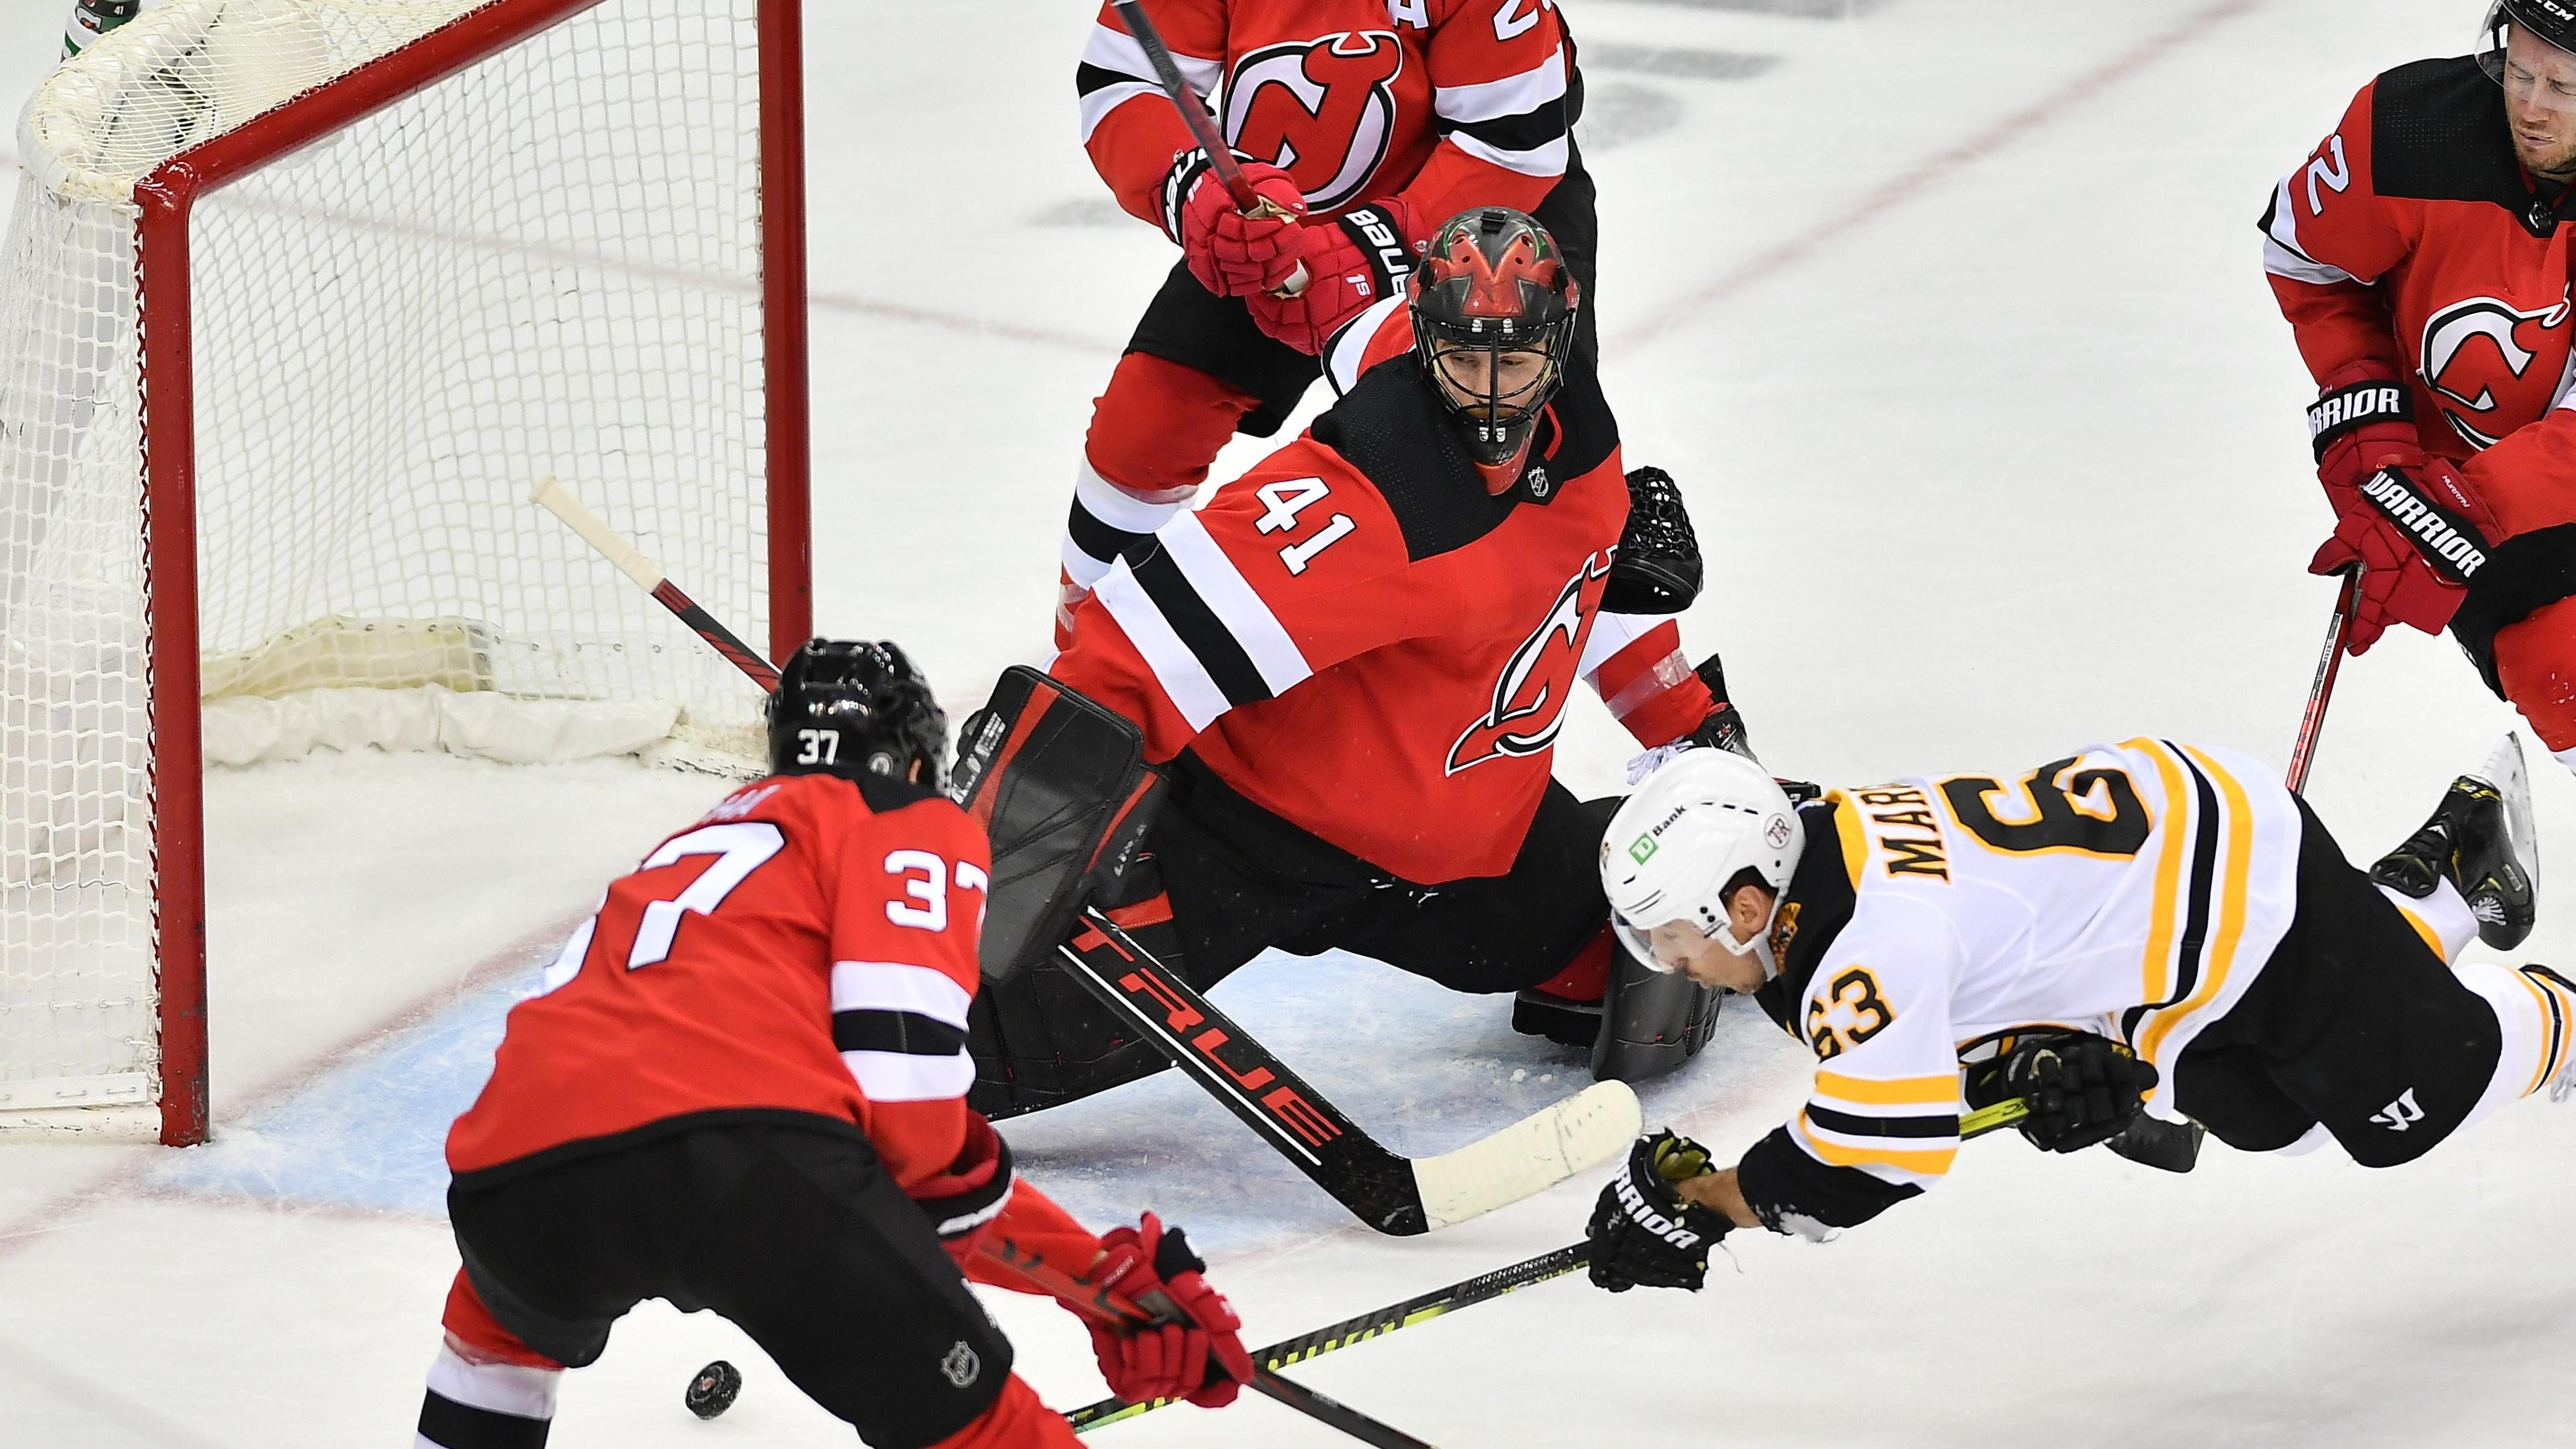 May 3, 2021; Newark, New Jersey, USA; Boston Bruins left wing Brad Marchand (63) takes a shot on goal during his 800th career game against New Jersey Devils goalie Scott Wedgewood (41) during the second period at Prudential Center. Mandatory Credit: Catalina Fragoso-USA TODAY Sports / May 3, 2021; Newark, New Jersey, USA; Boston Bruins left wing Brad Marchand (63) takes a shot on goal during his 800th career game against New Jersey Devils goalie Scott Wedgewood (41) during the second period at Prudential Center. Mandatory Credit: Catalina Fragoso-USA TODAY Sports